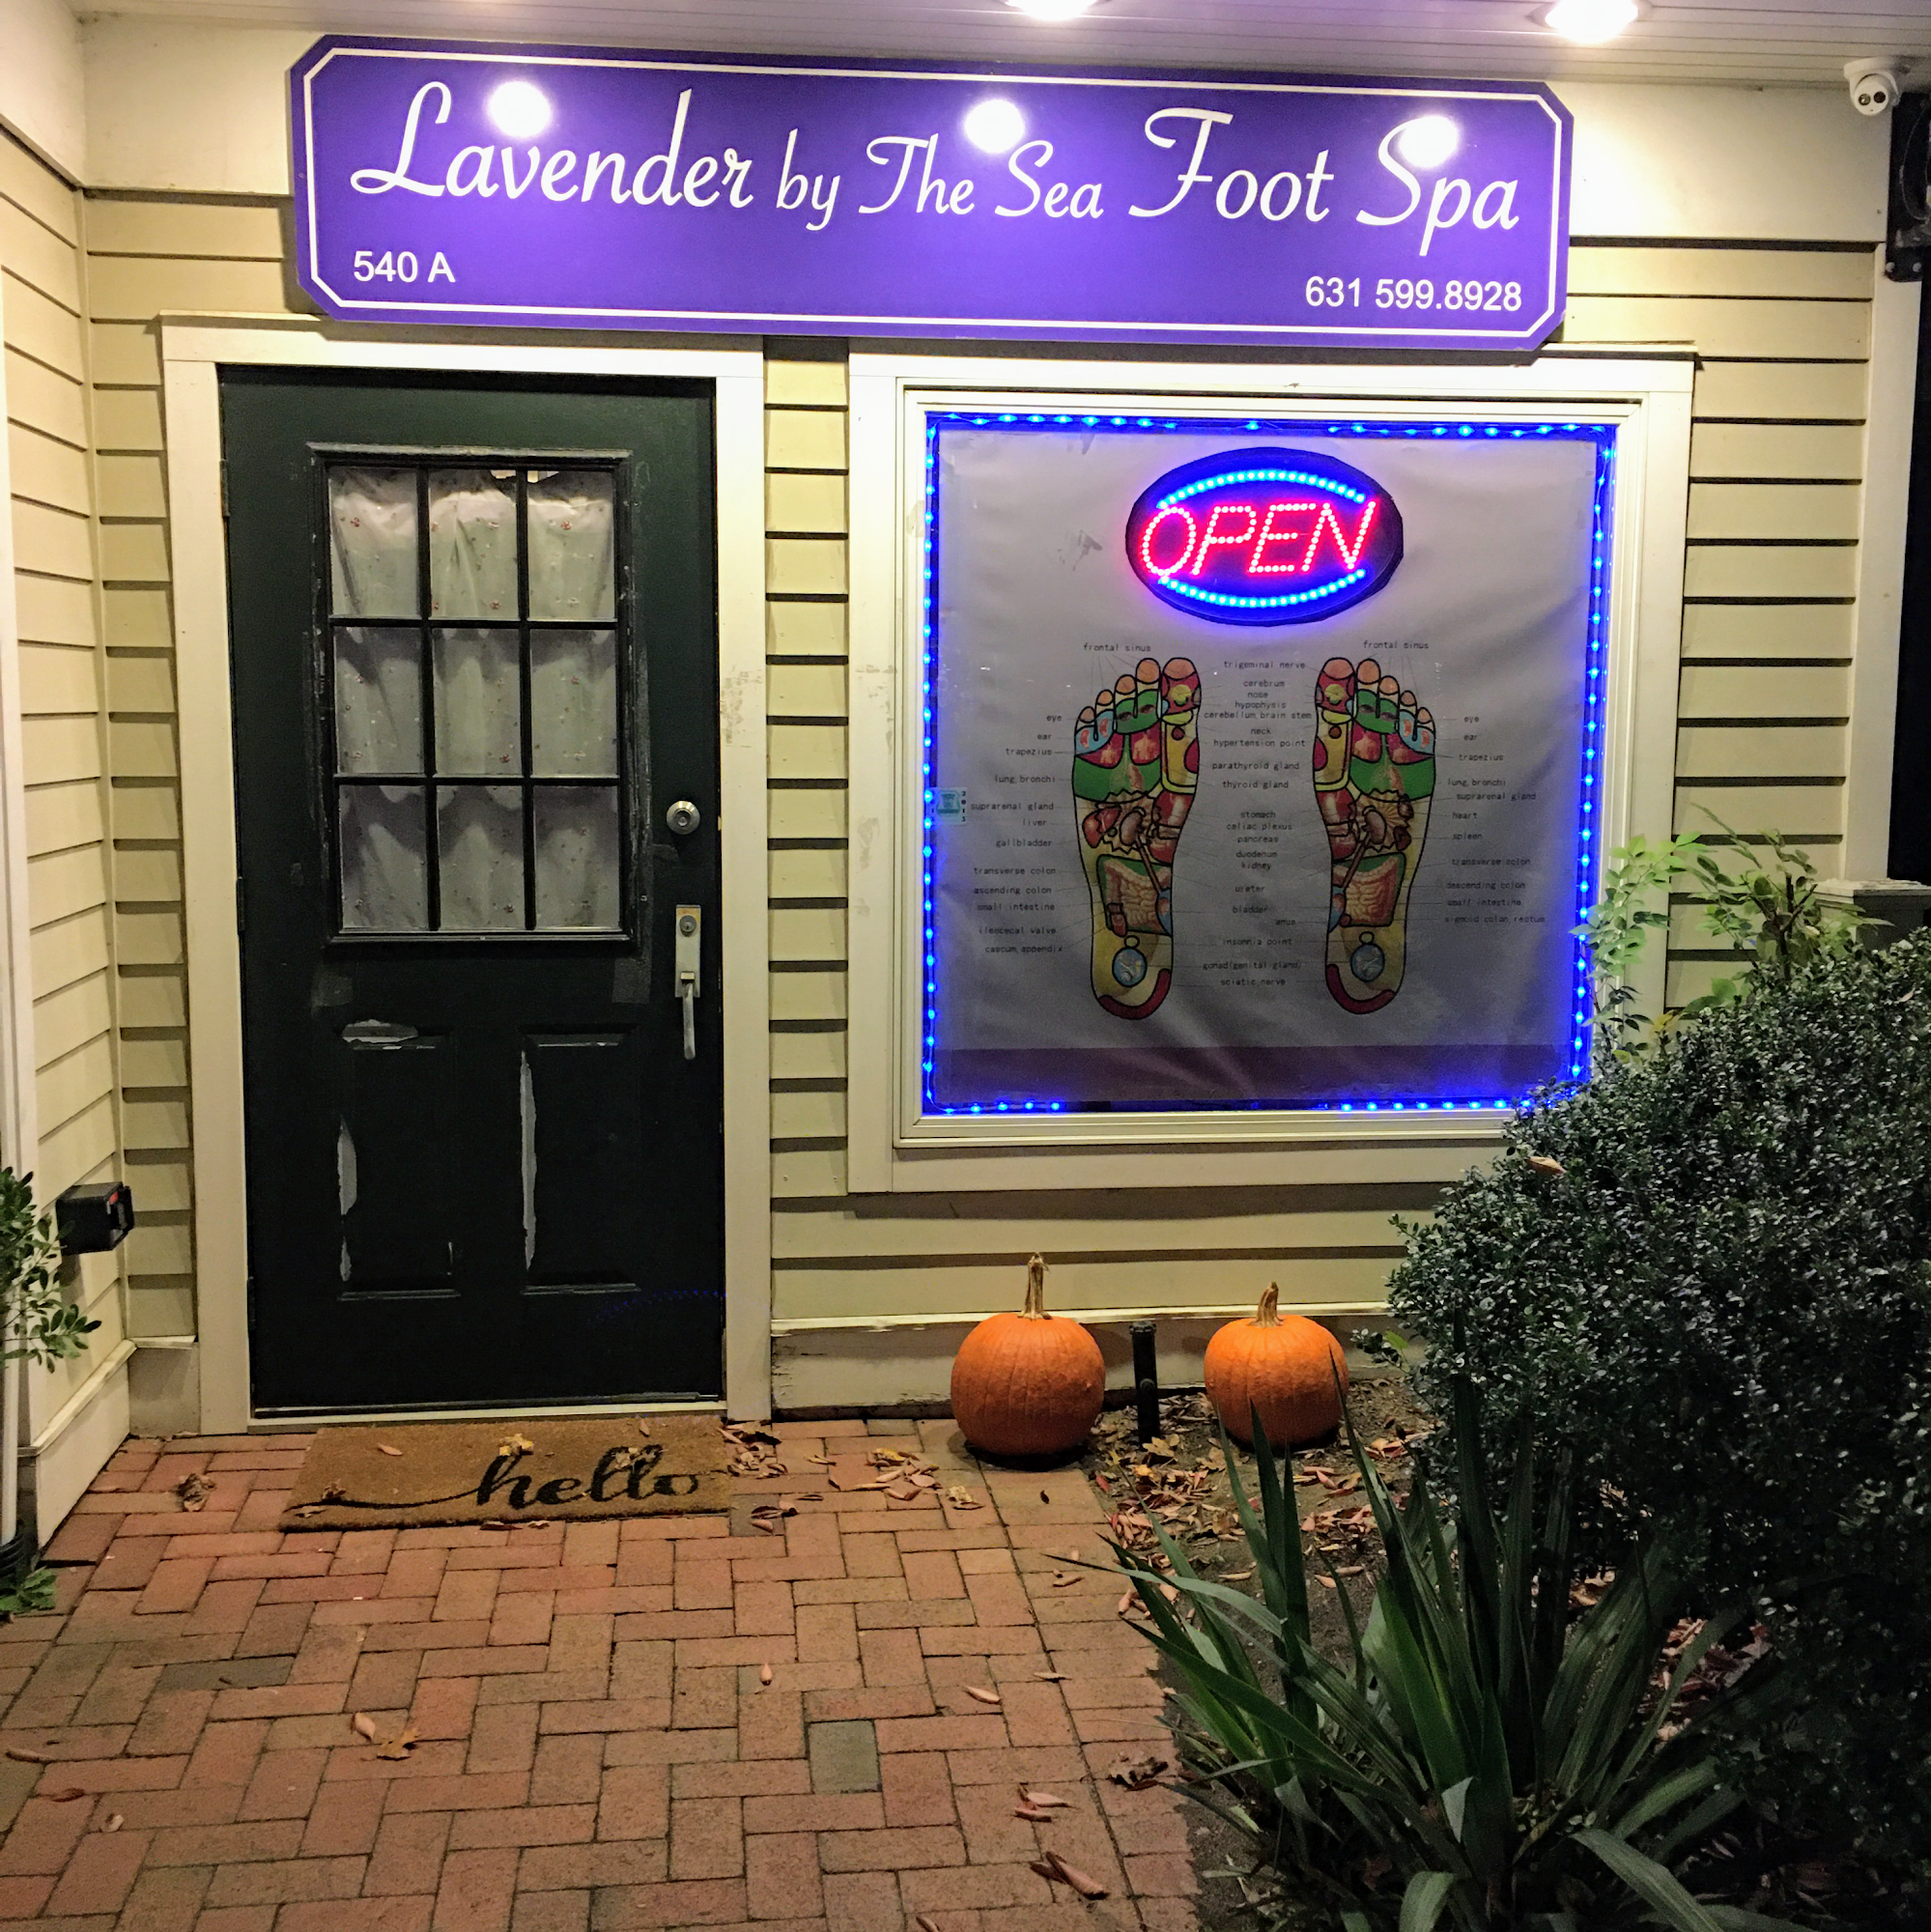 Lavender by the Sea Foot Spa 540 Montauk Hwy, East Quogue New York 11942